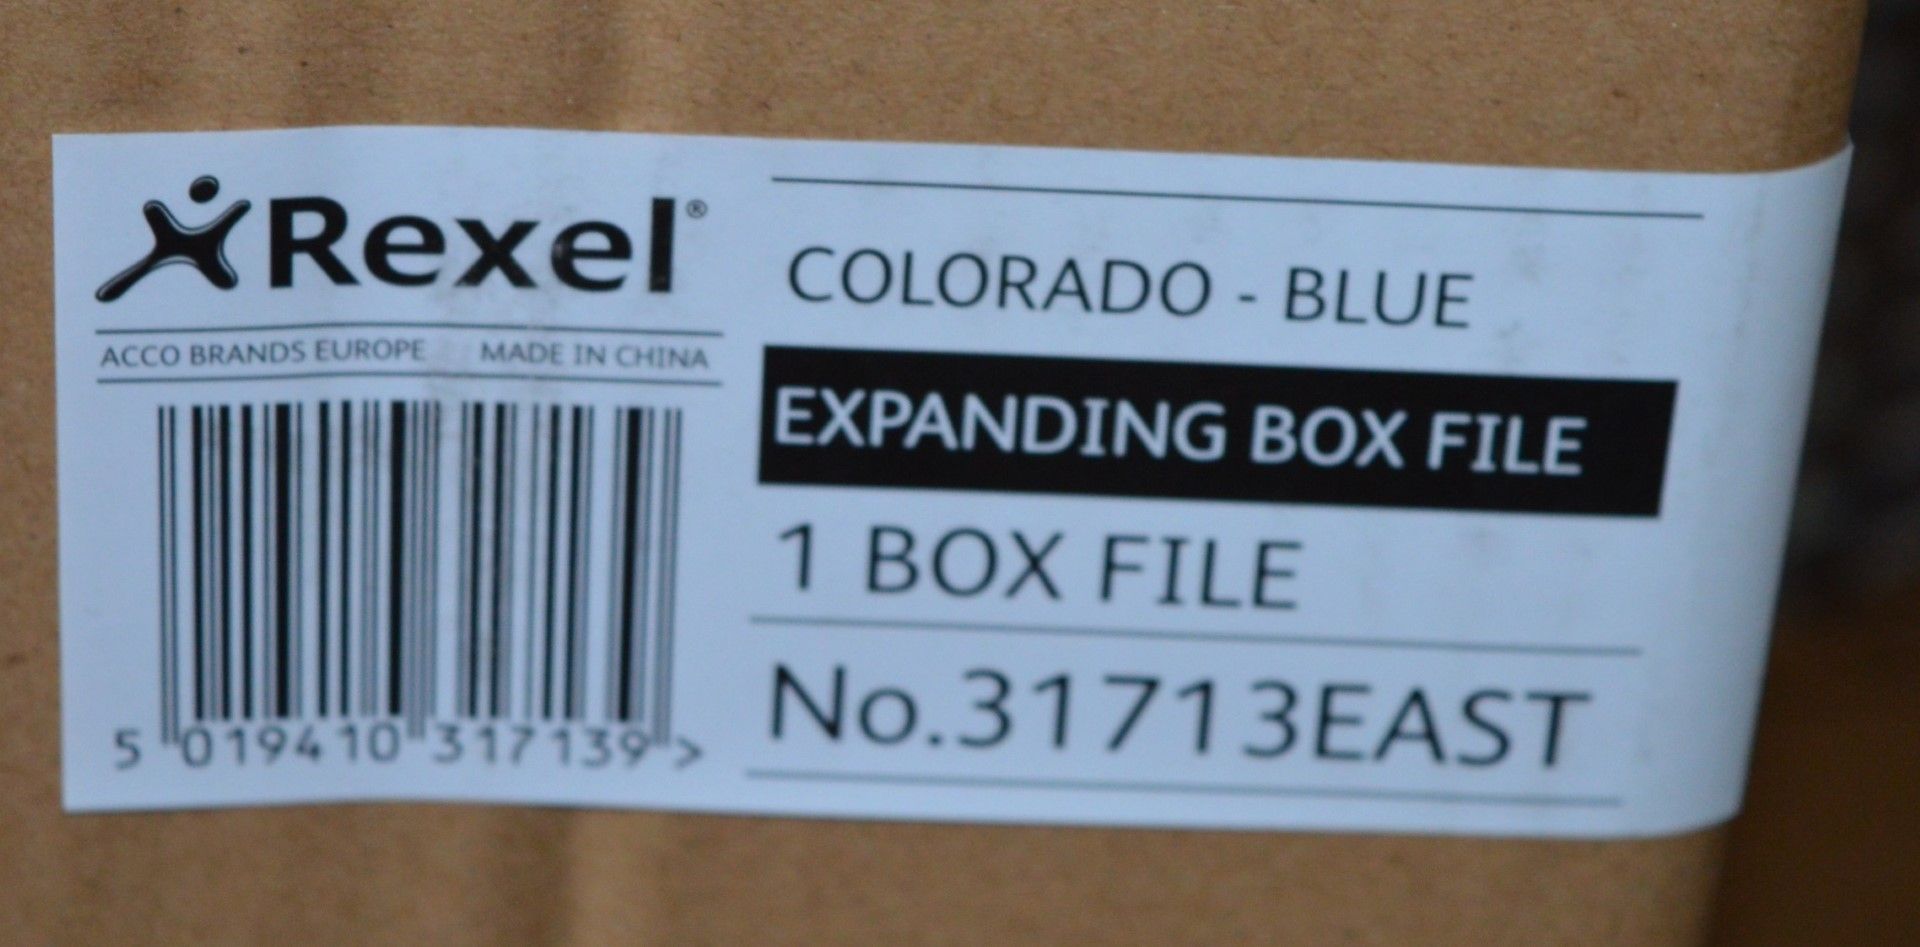 4 x Rexel Colorado Expanding Document Box Files - Blue Colour - Product Code 31713EAST - Brand New - Image 3 of 5